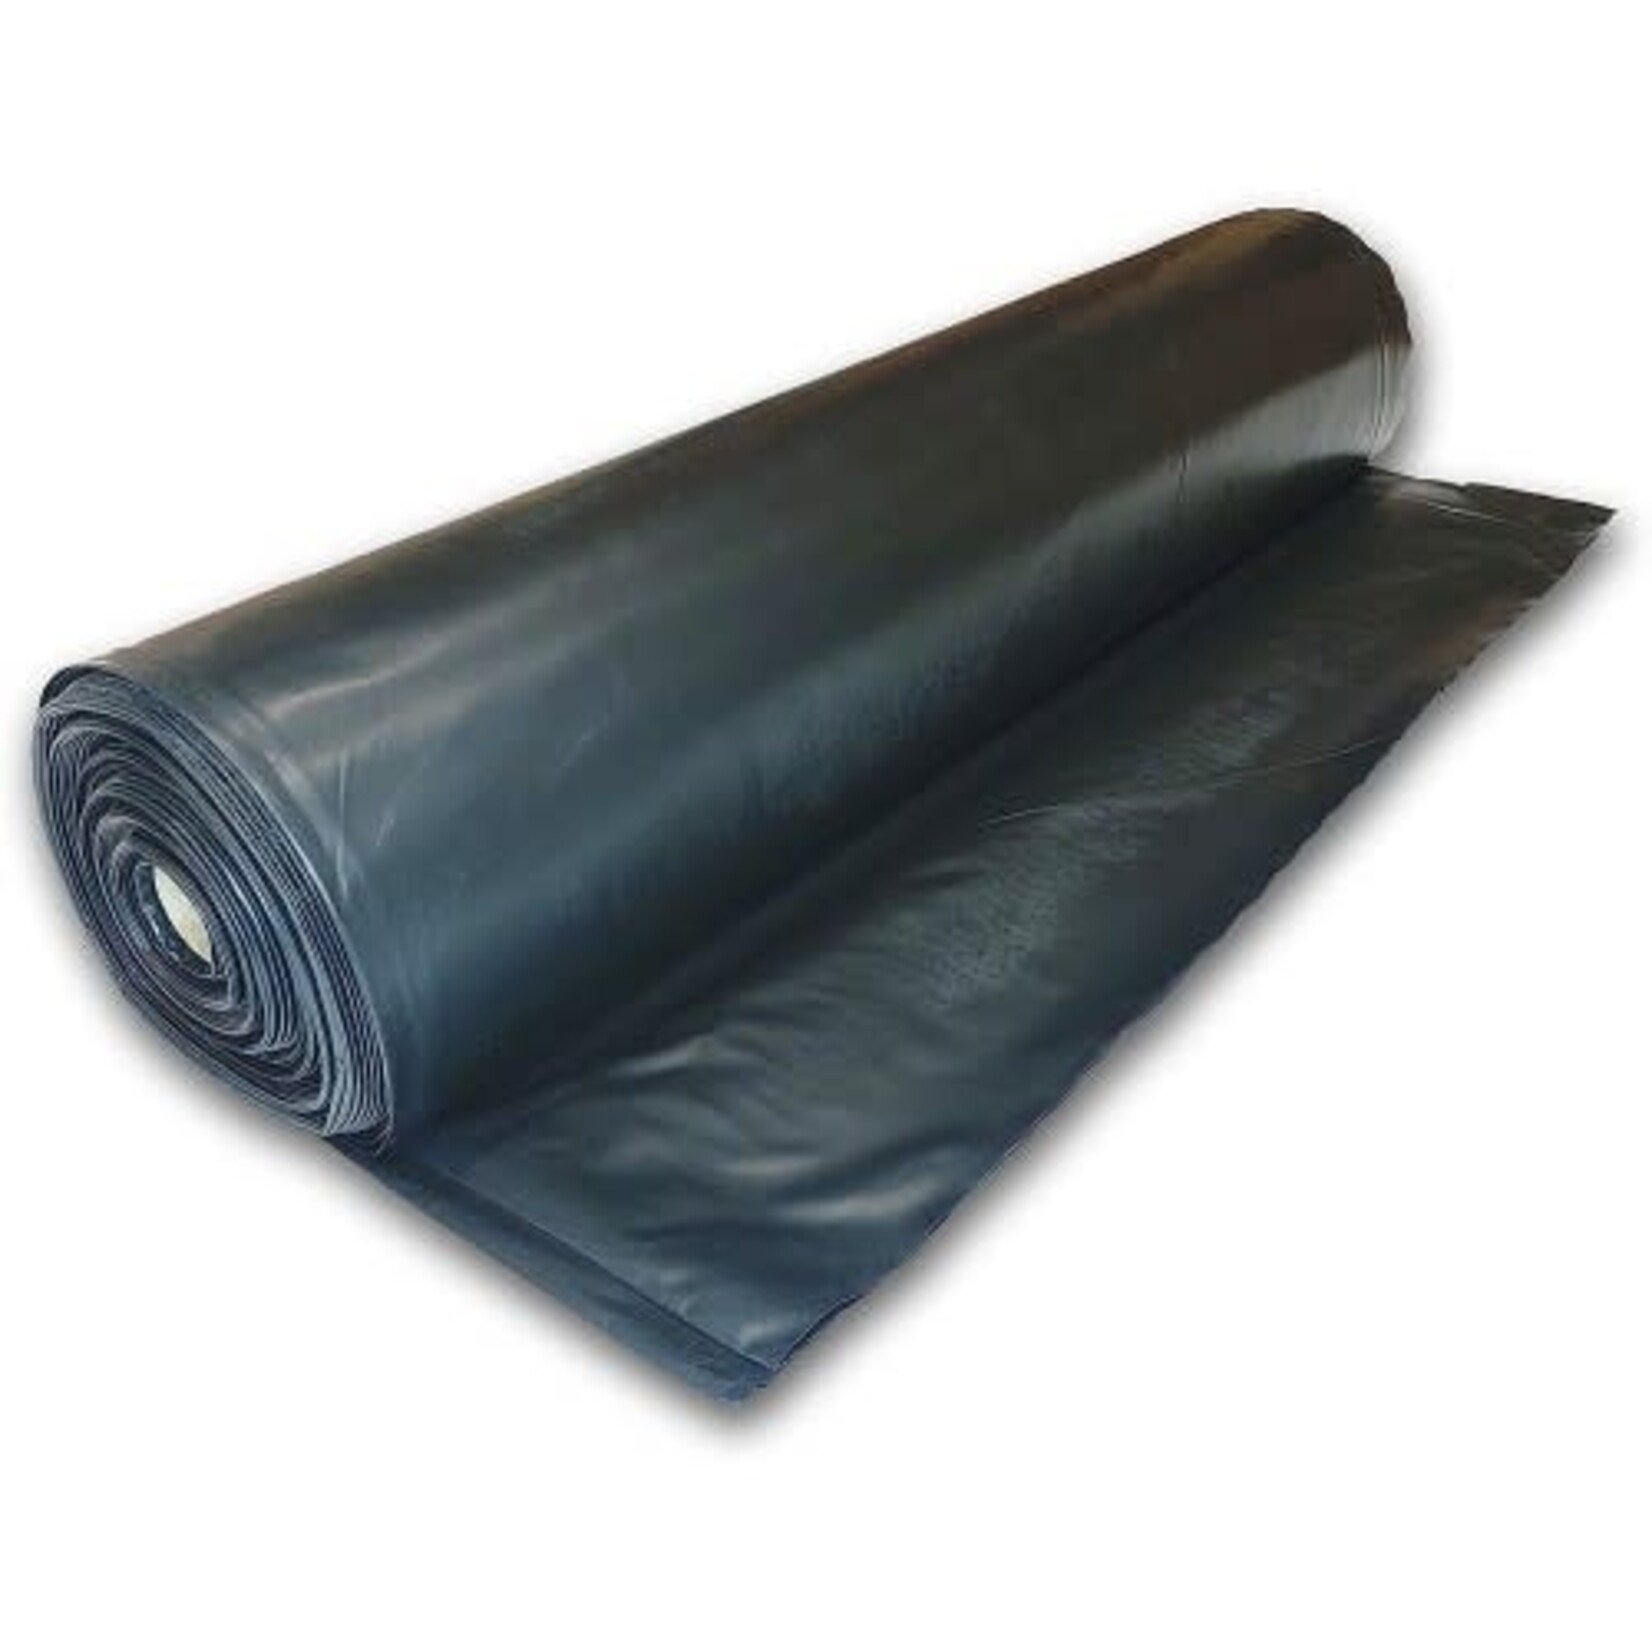 SteelCoat SteelCoat - Poly Sheeting - 6 MIL - 20' x 100' - Black